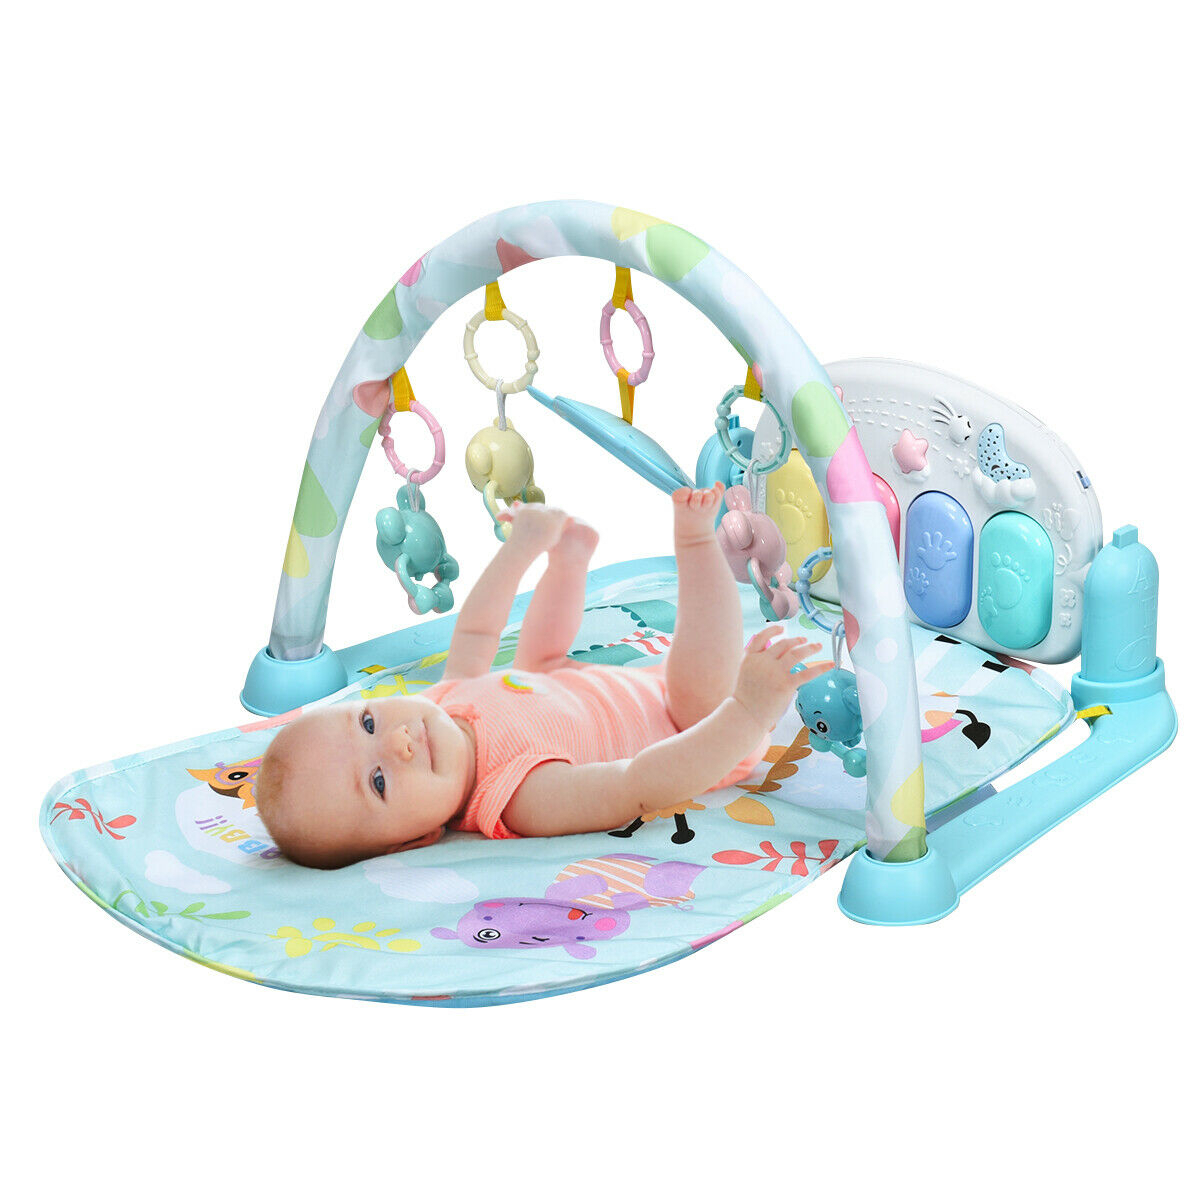 Baby Gym Play Mat 3 In 1 Fitness Music And Lights Fun Piano Activity Center Pink Blue - Blue